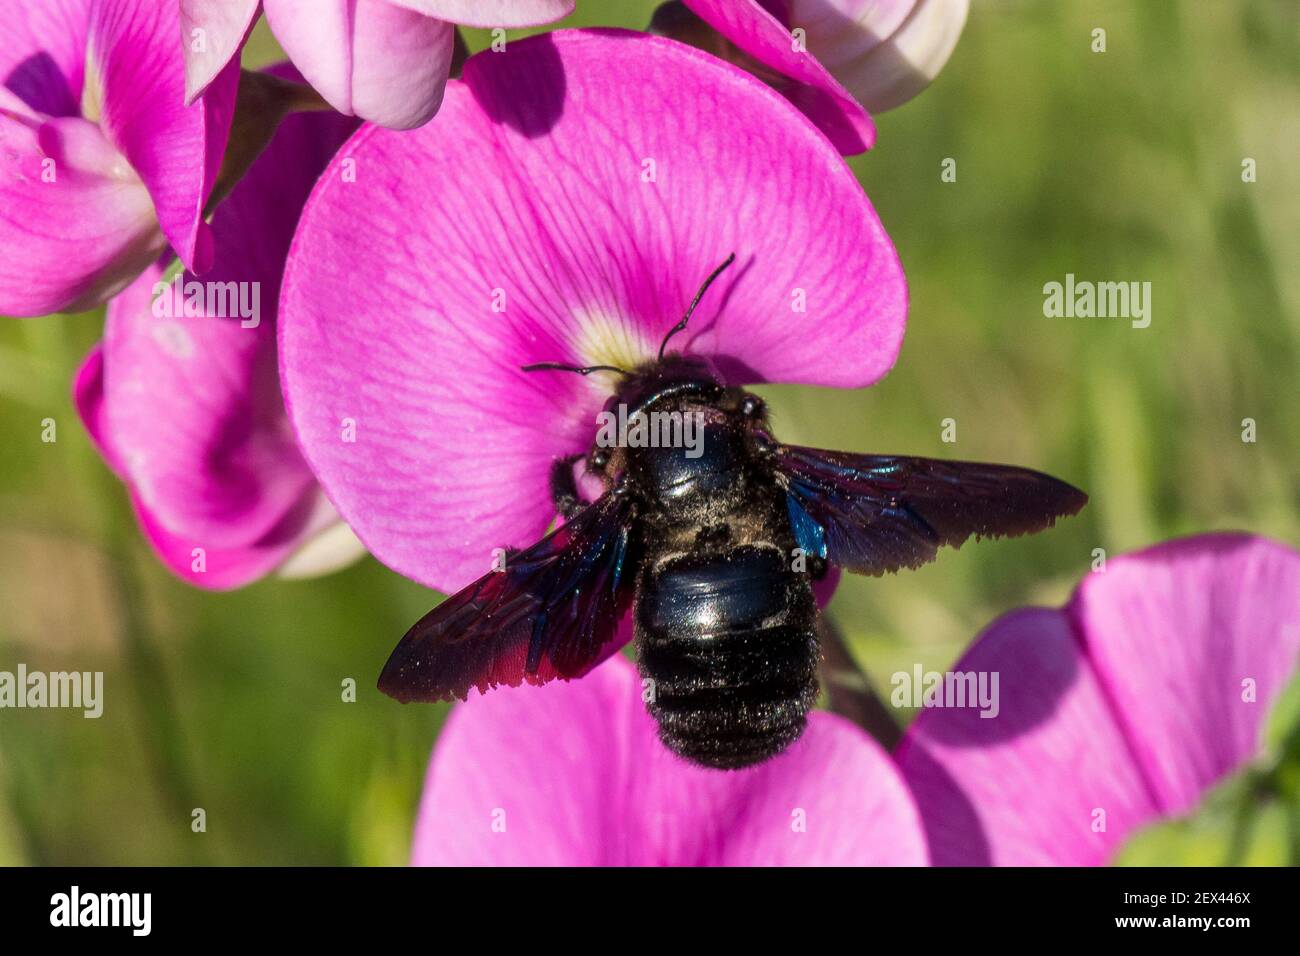 Carpenter Bee (Xylocopa violacea) on Fabacea flower, Burgundy, France Stock Photo